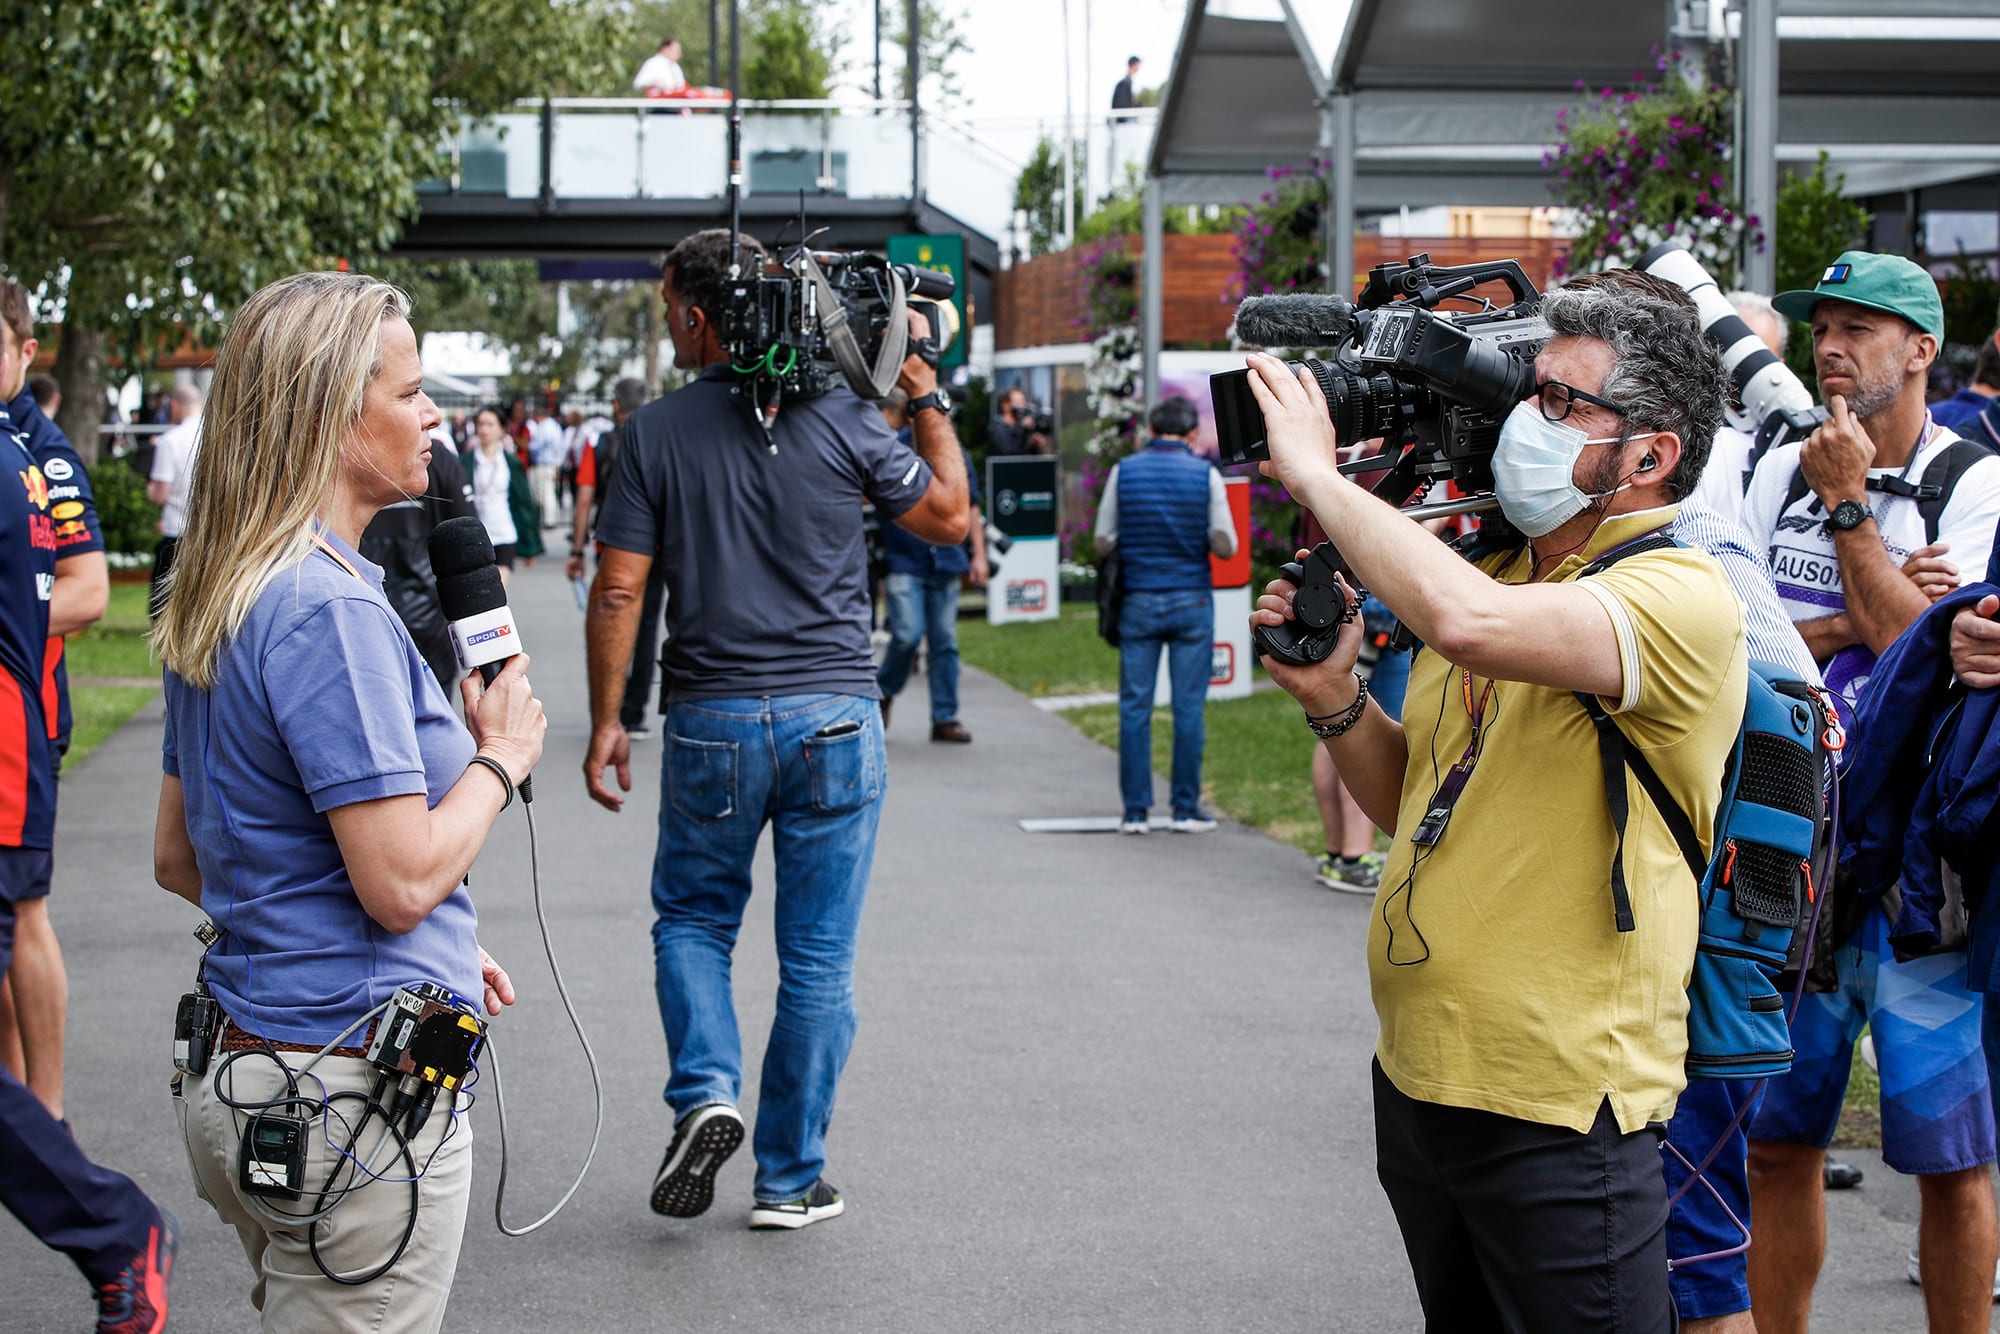 Cameraman in a face mask in the paddock at the 2020 Australian Grand Prix